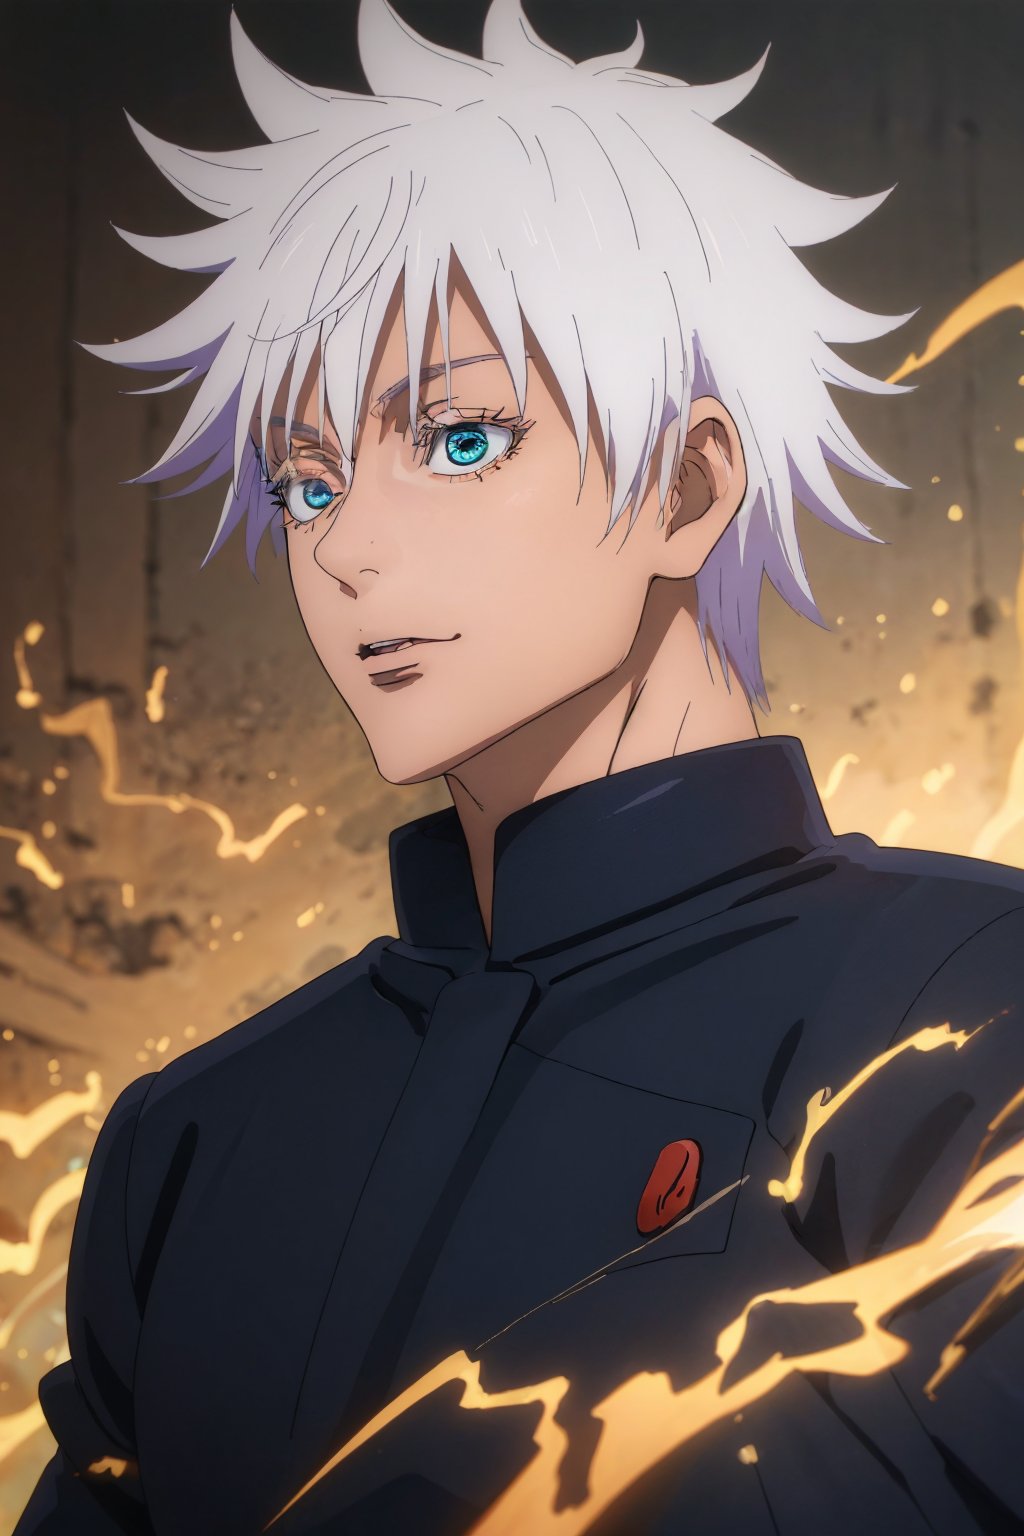 (best quality,4k,8k,highres,masterpiece:1.2),ultra-detailed,(realistic,photorealistic,photo-realistic:1.37),jujutsu Kaisen,Satoru Gojo,skilled,invincible,confident,serious expression,powerful eyes,colorful robe,wrapping bandages,curly hair,striking personality,controlled cursed energy,bright blue glow,action pose,exuding aura of power,background of swirling cursed energy,artistic portrait,anime style,vibrant colors,dynamic lighting